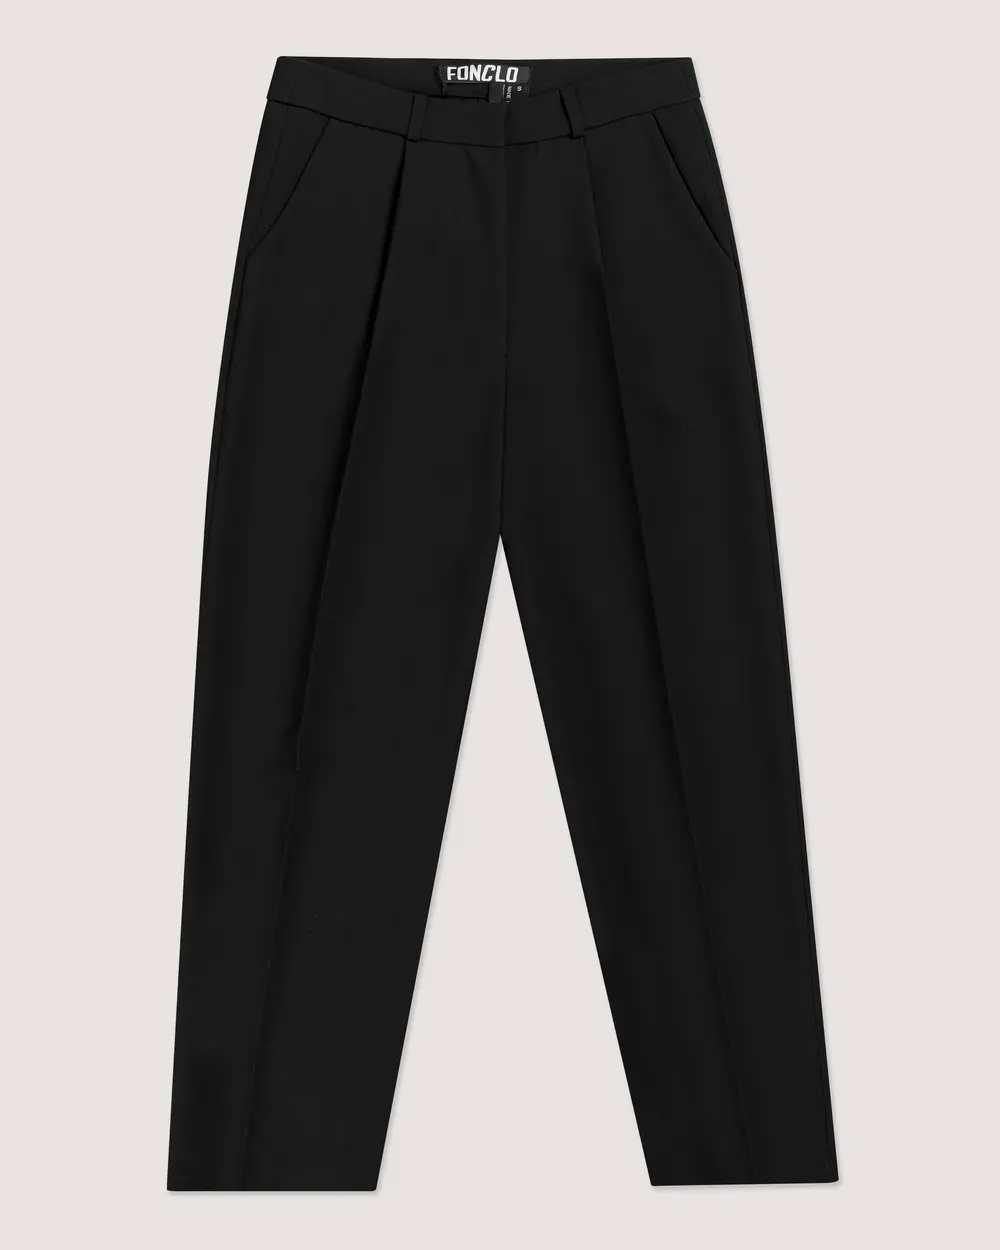 Ankle Length Pleated Pants